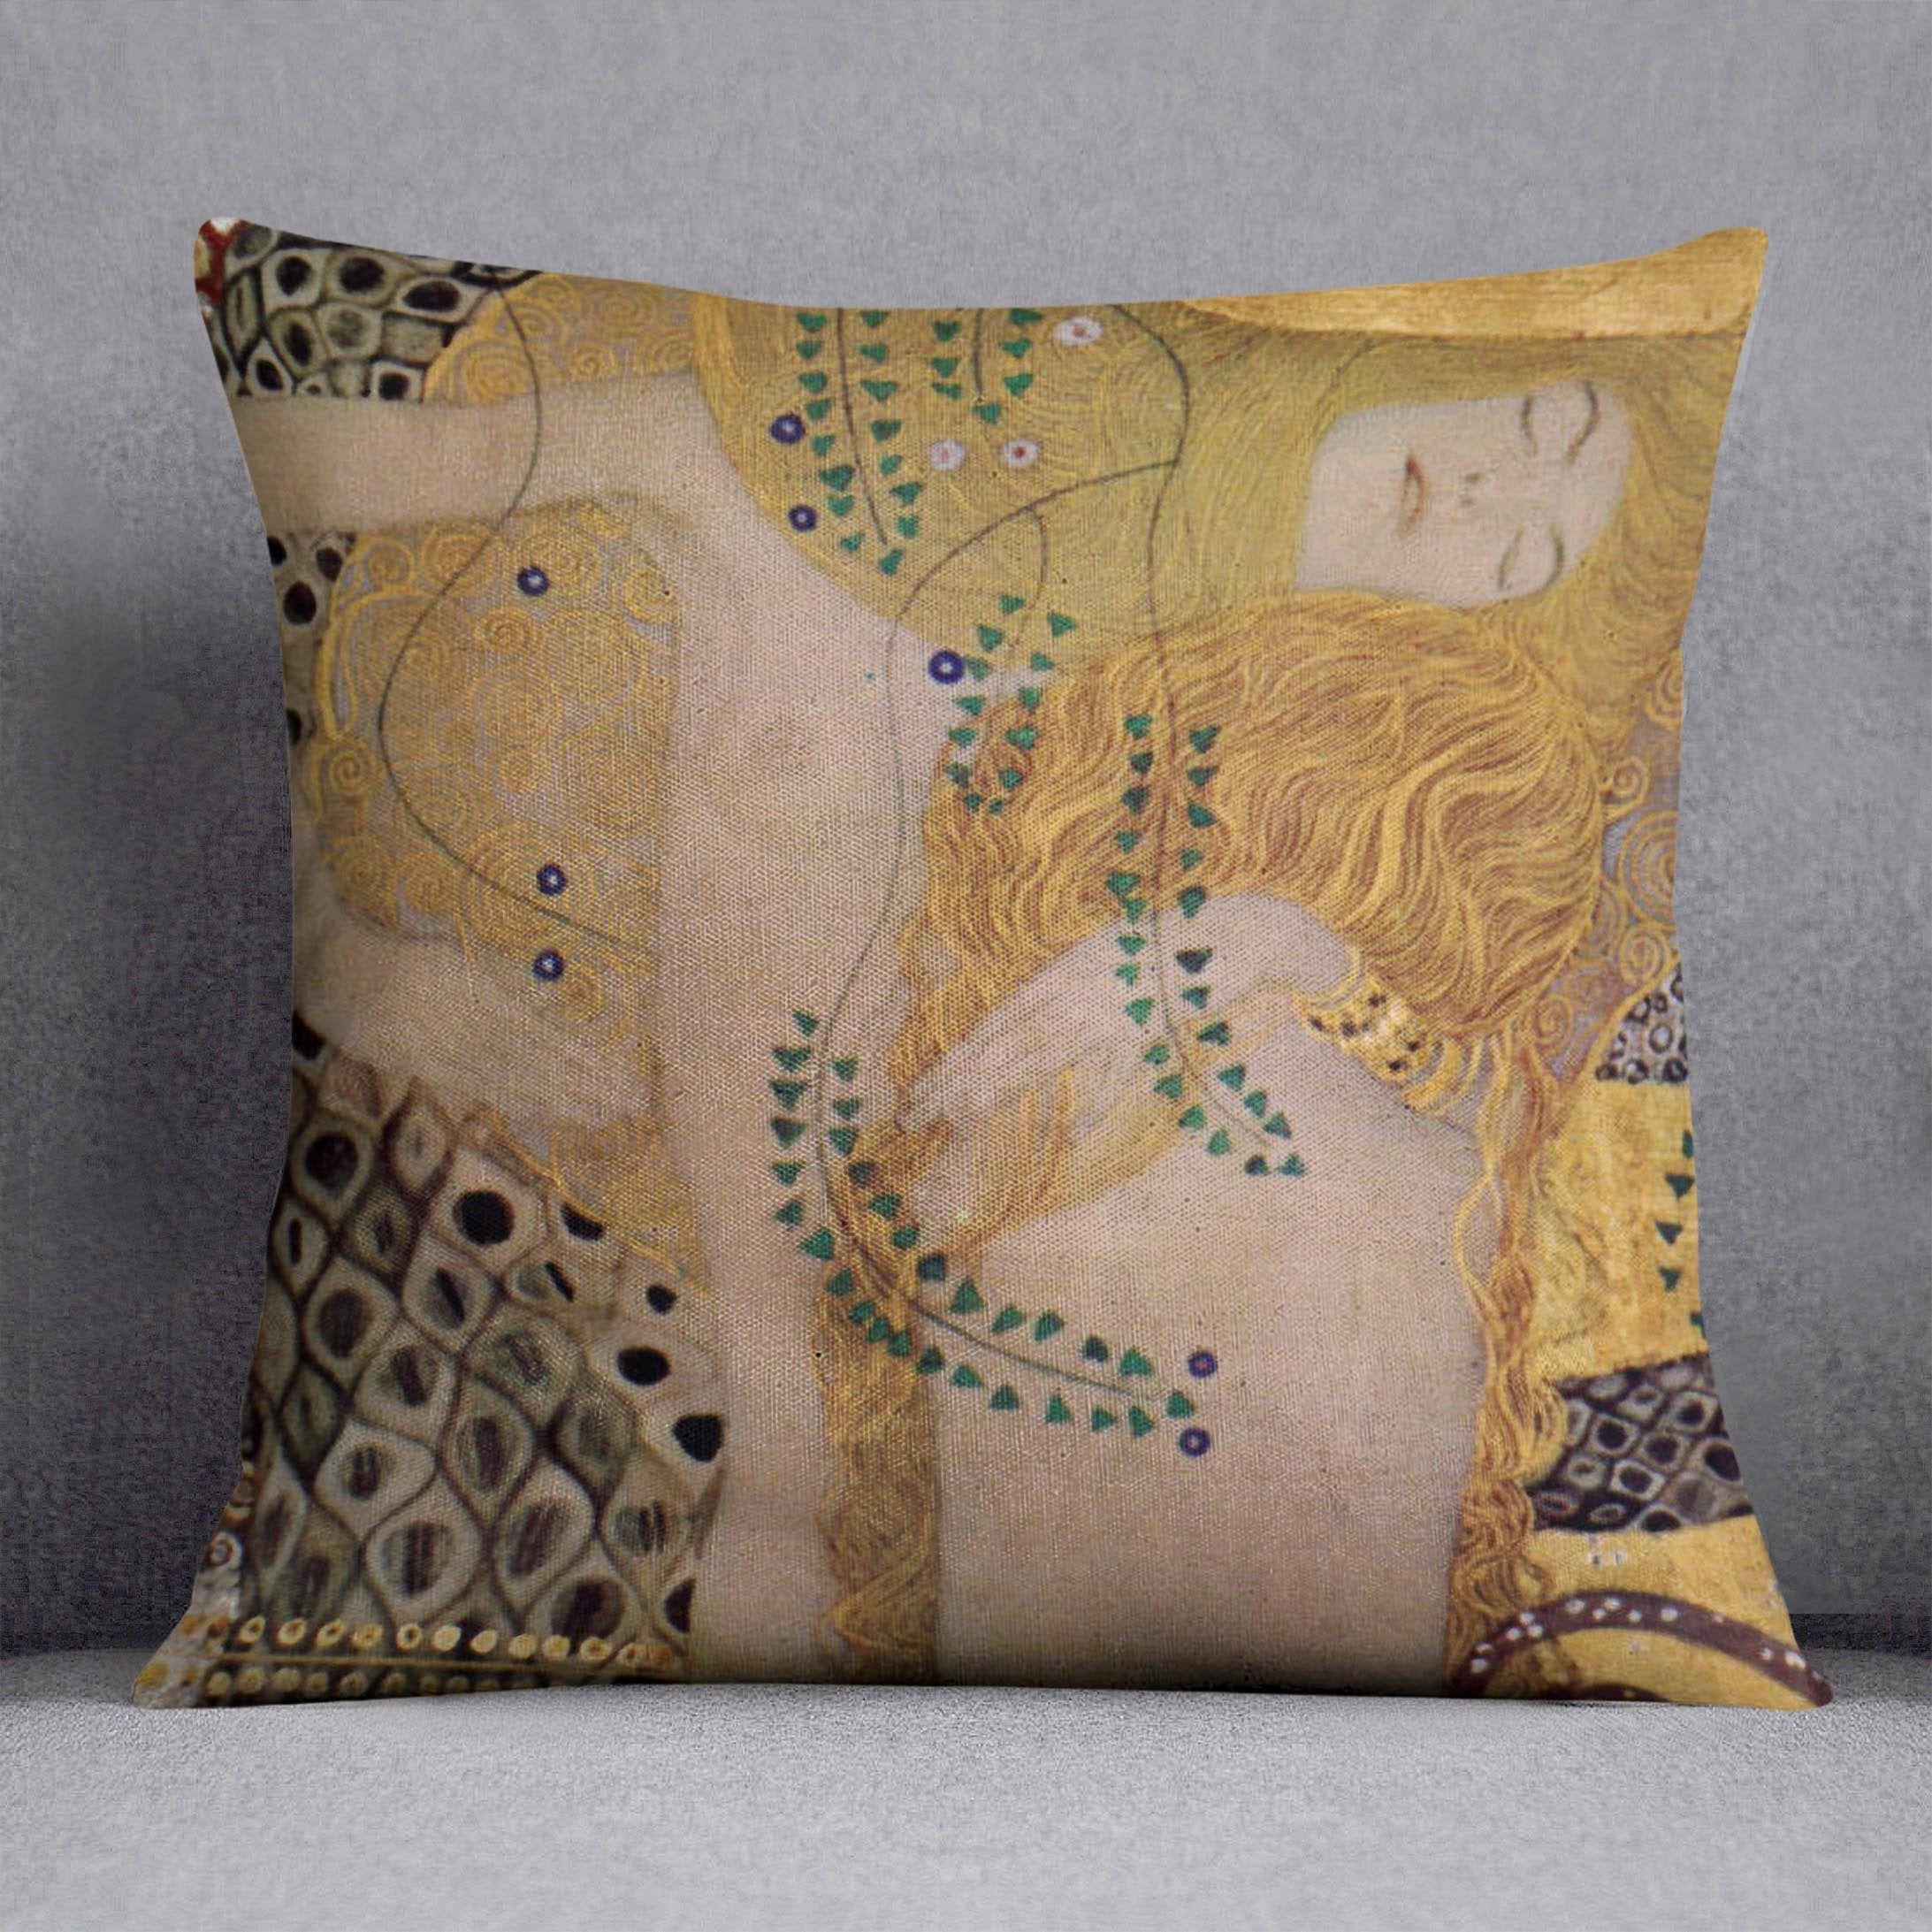 Water snakes friends I by Klimt Throw Pillow